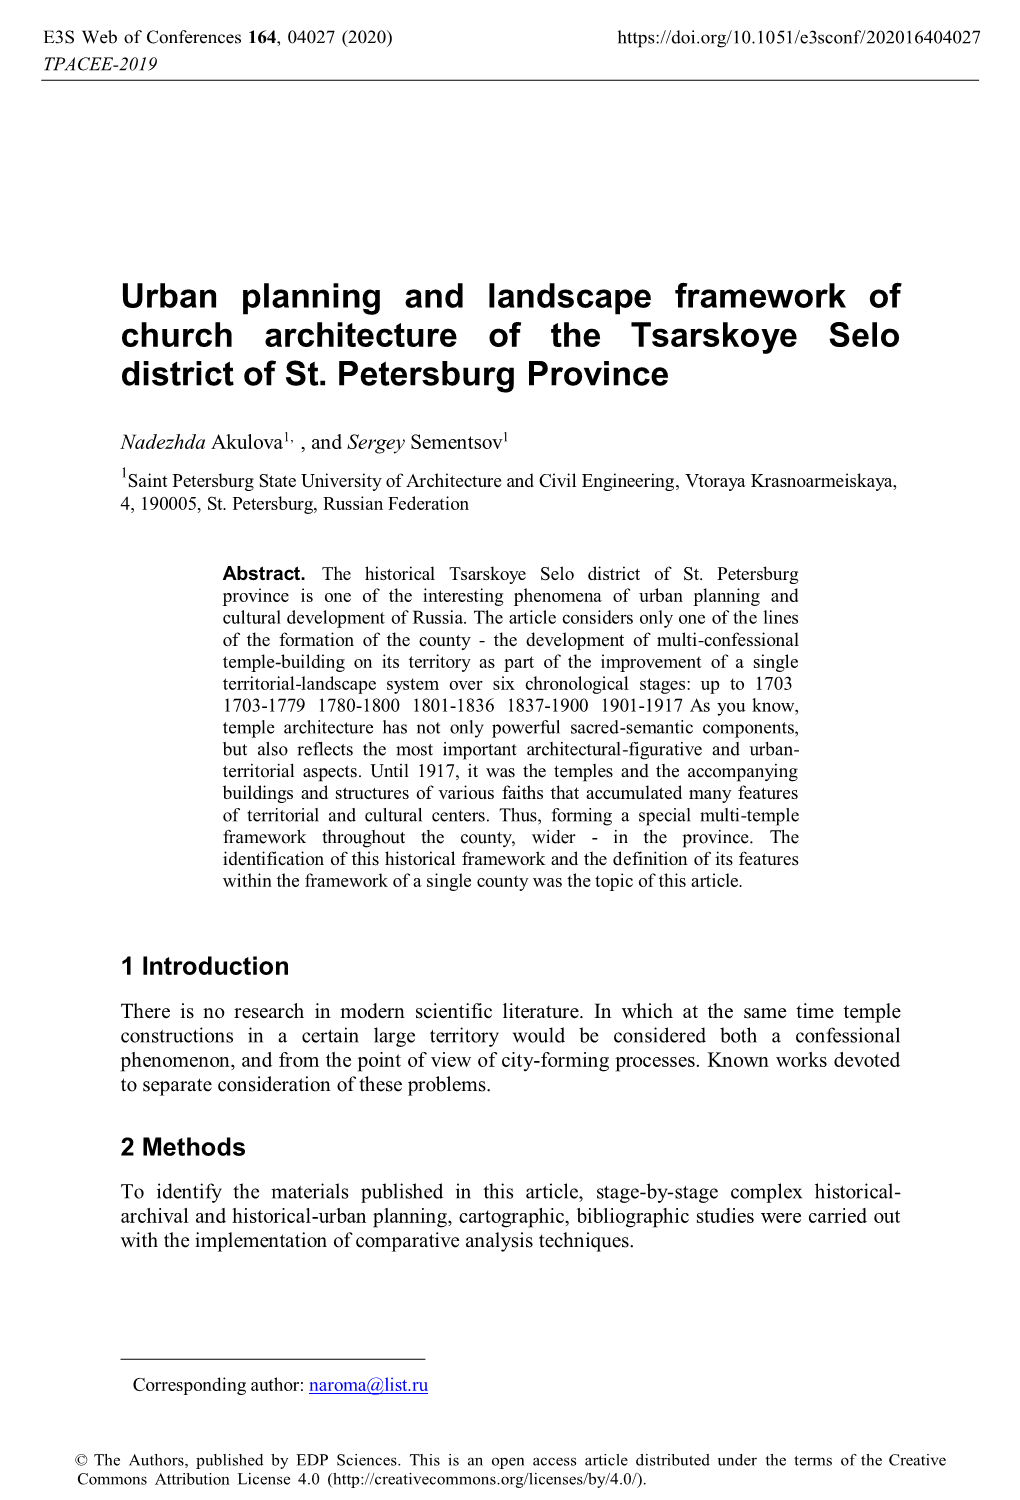 Urban Planning and Landscape Framework of Church Architecture of the Tsarskoye Selo District of St